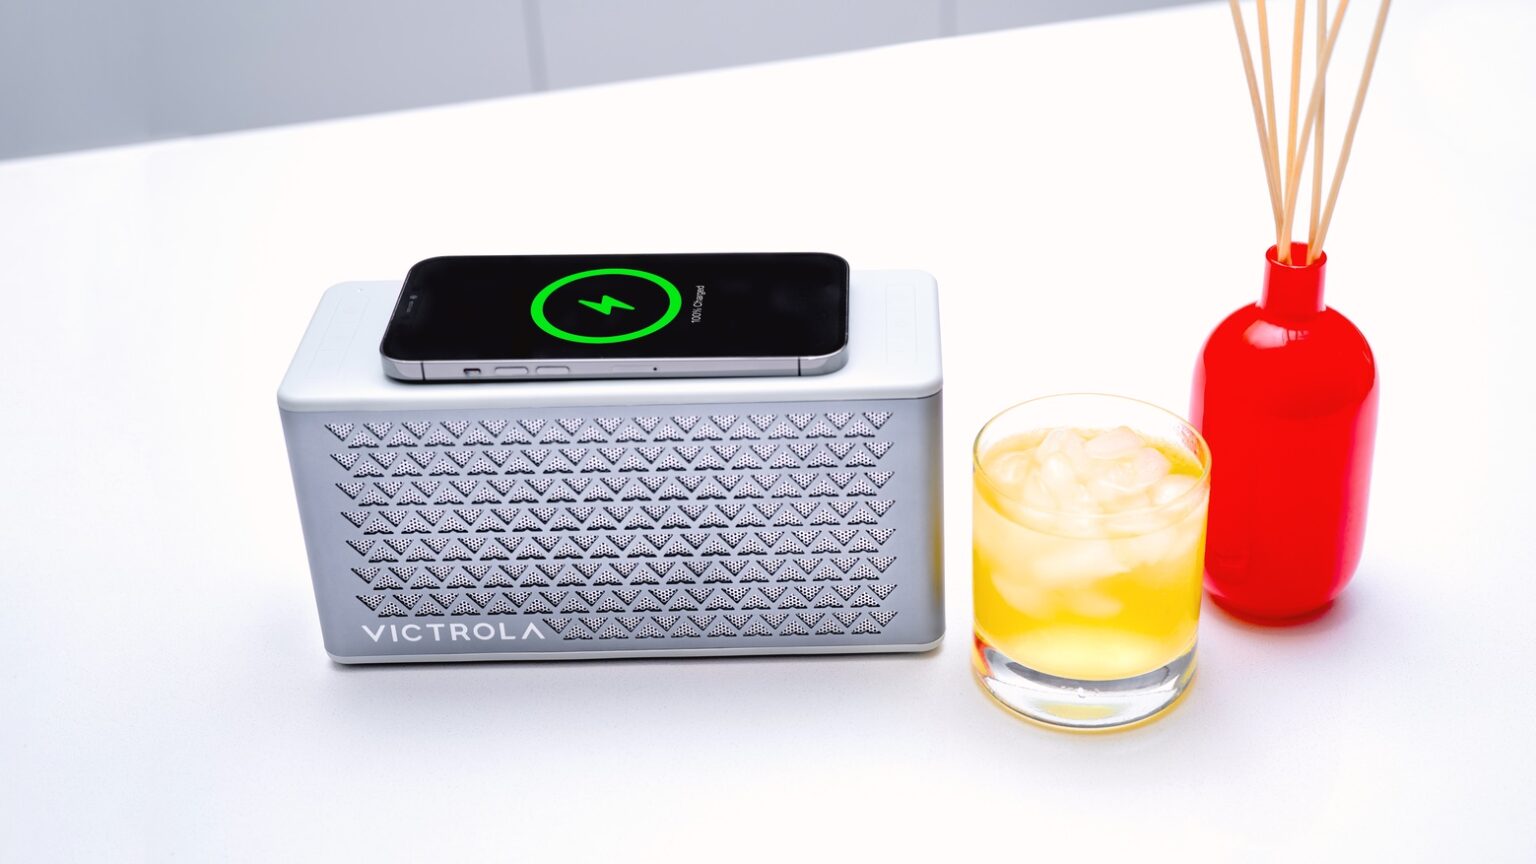 Victrola's stylish new wireless speakers are for indoors or on the go